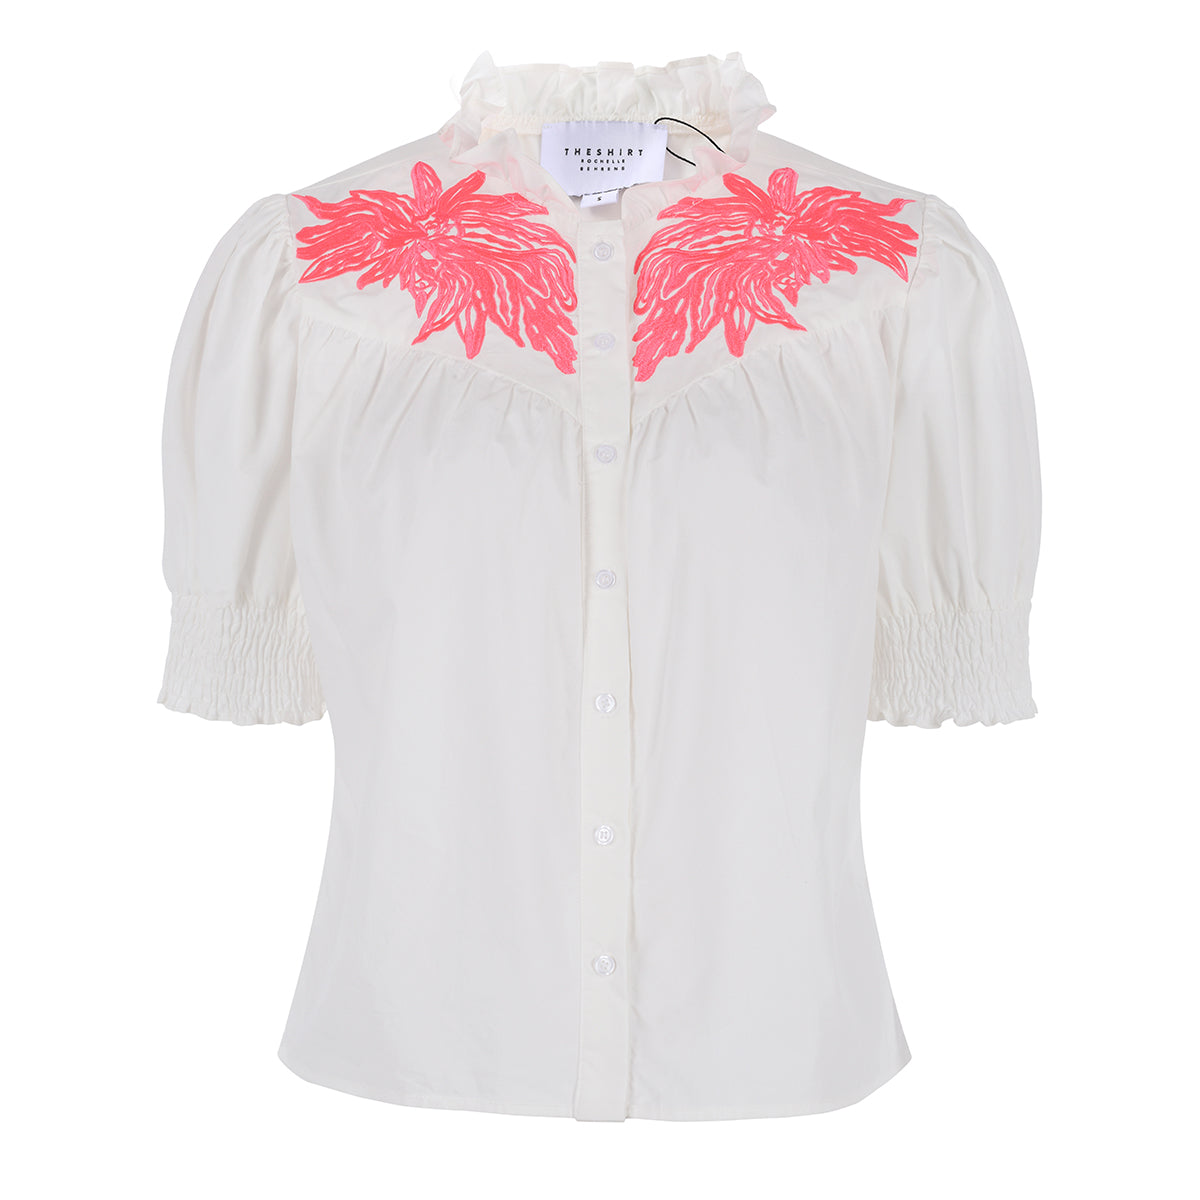 The Shirt - The Nicole Shirt - White/Pink Embroidery